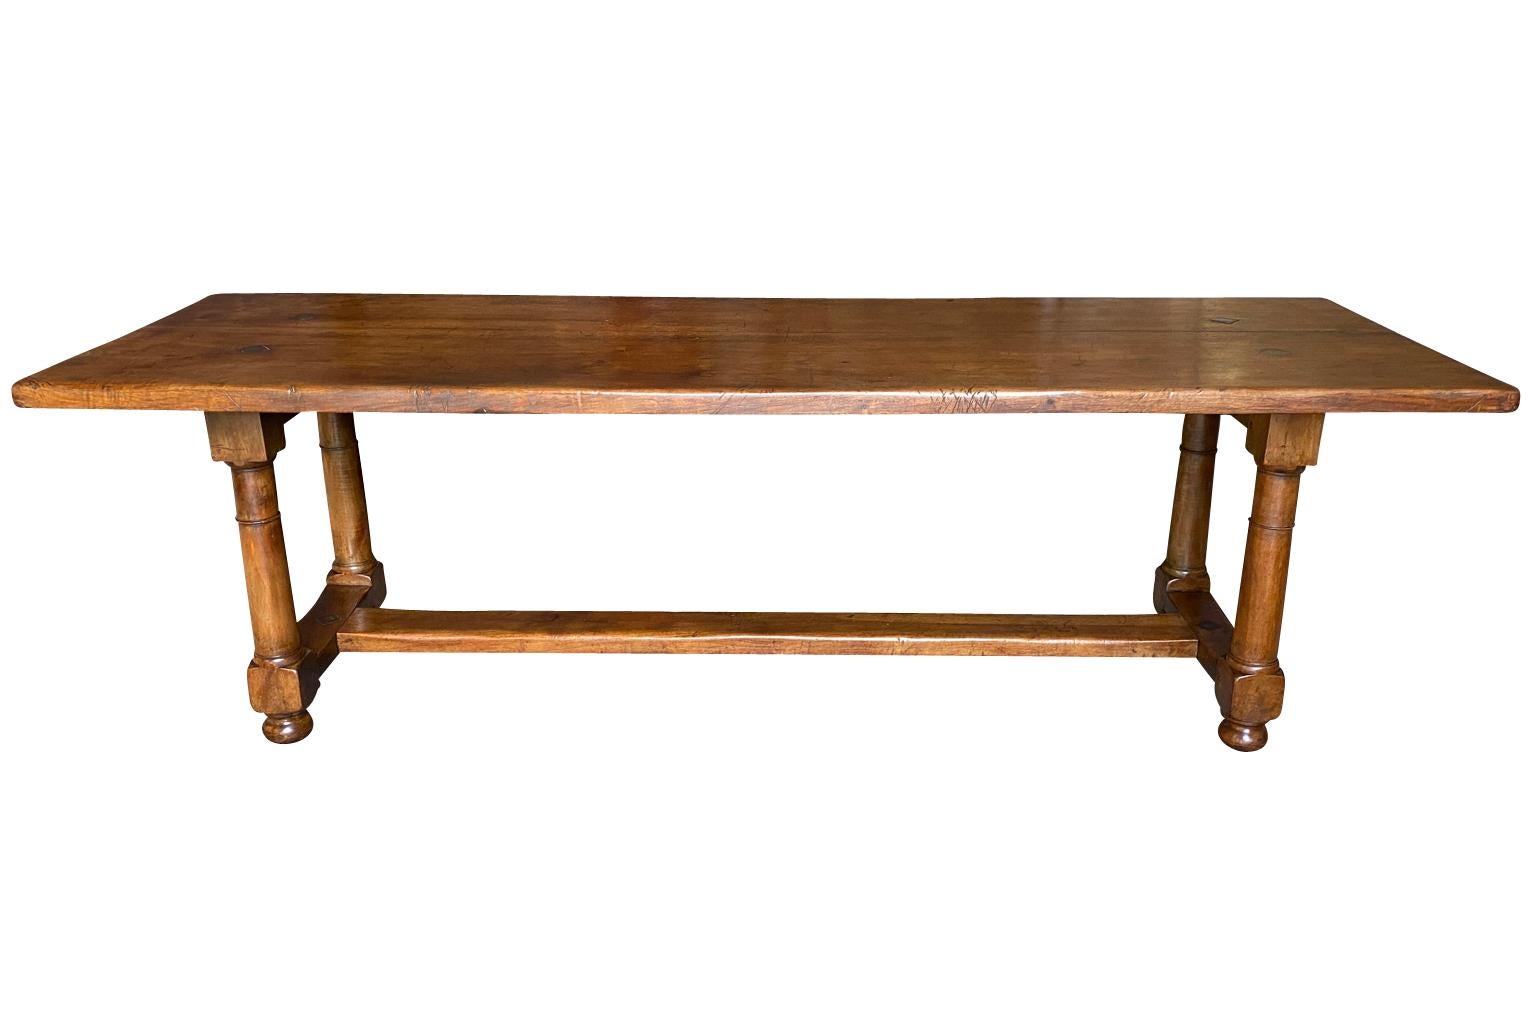 A very lovely early 19th century Trestle Table - Farm Table from the Provence region of France.  Soundly constructed from stunning walnut with a thick top plank, column legs resting on bun feet.  Beautiful patina.